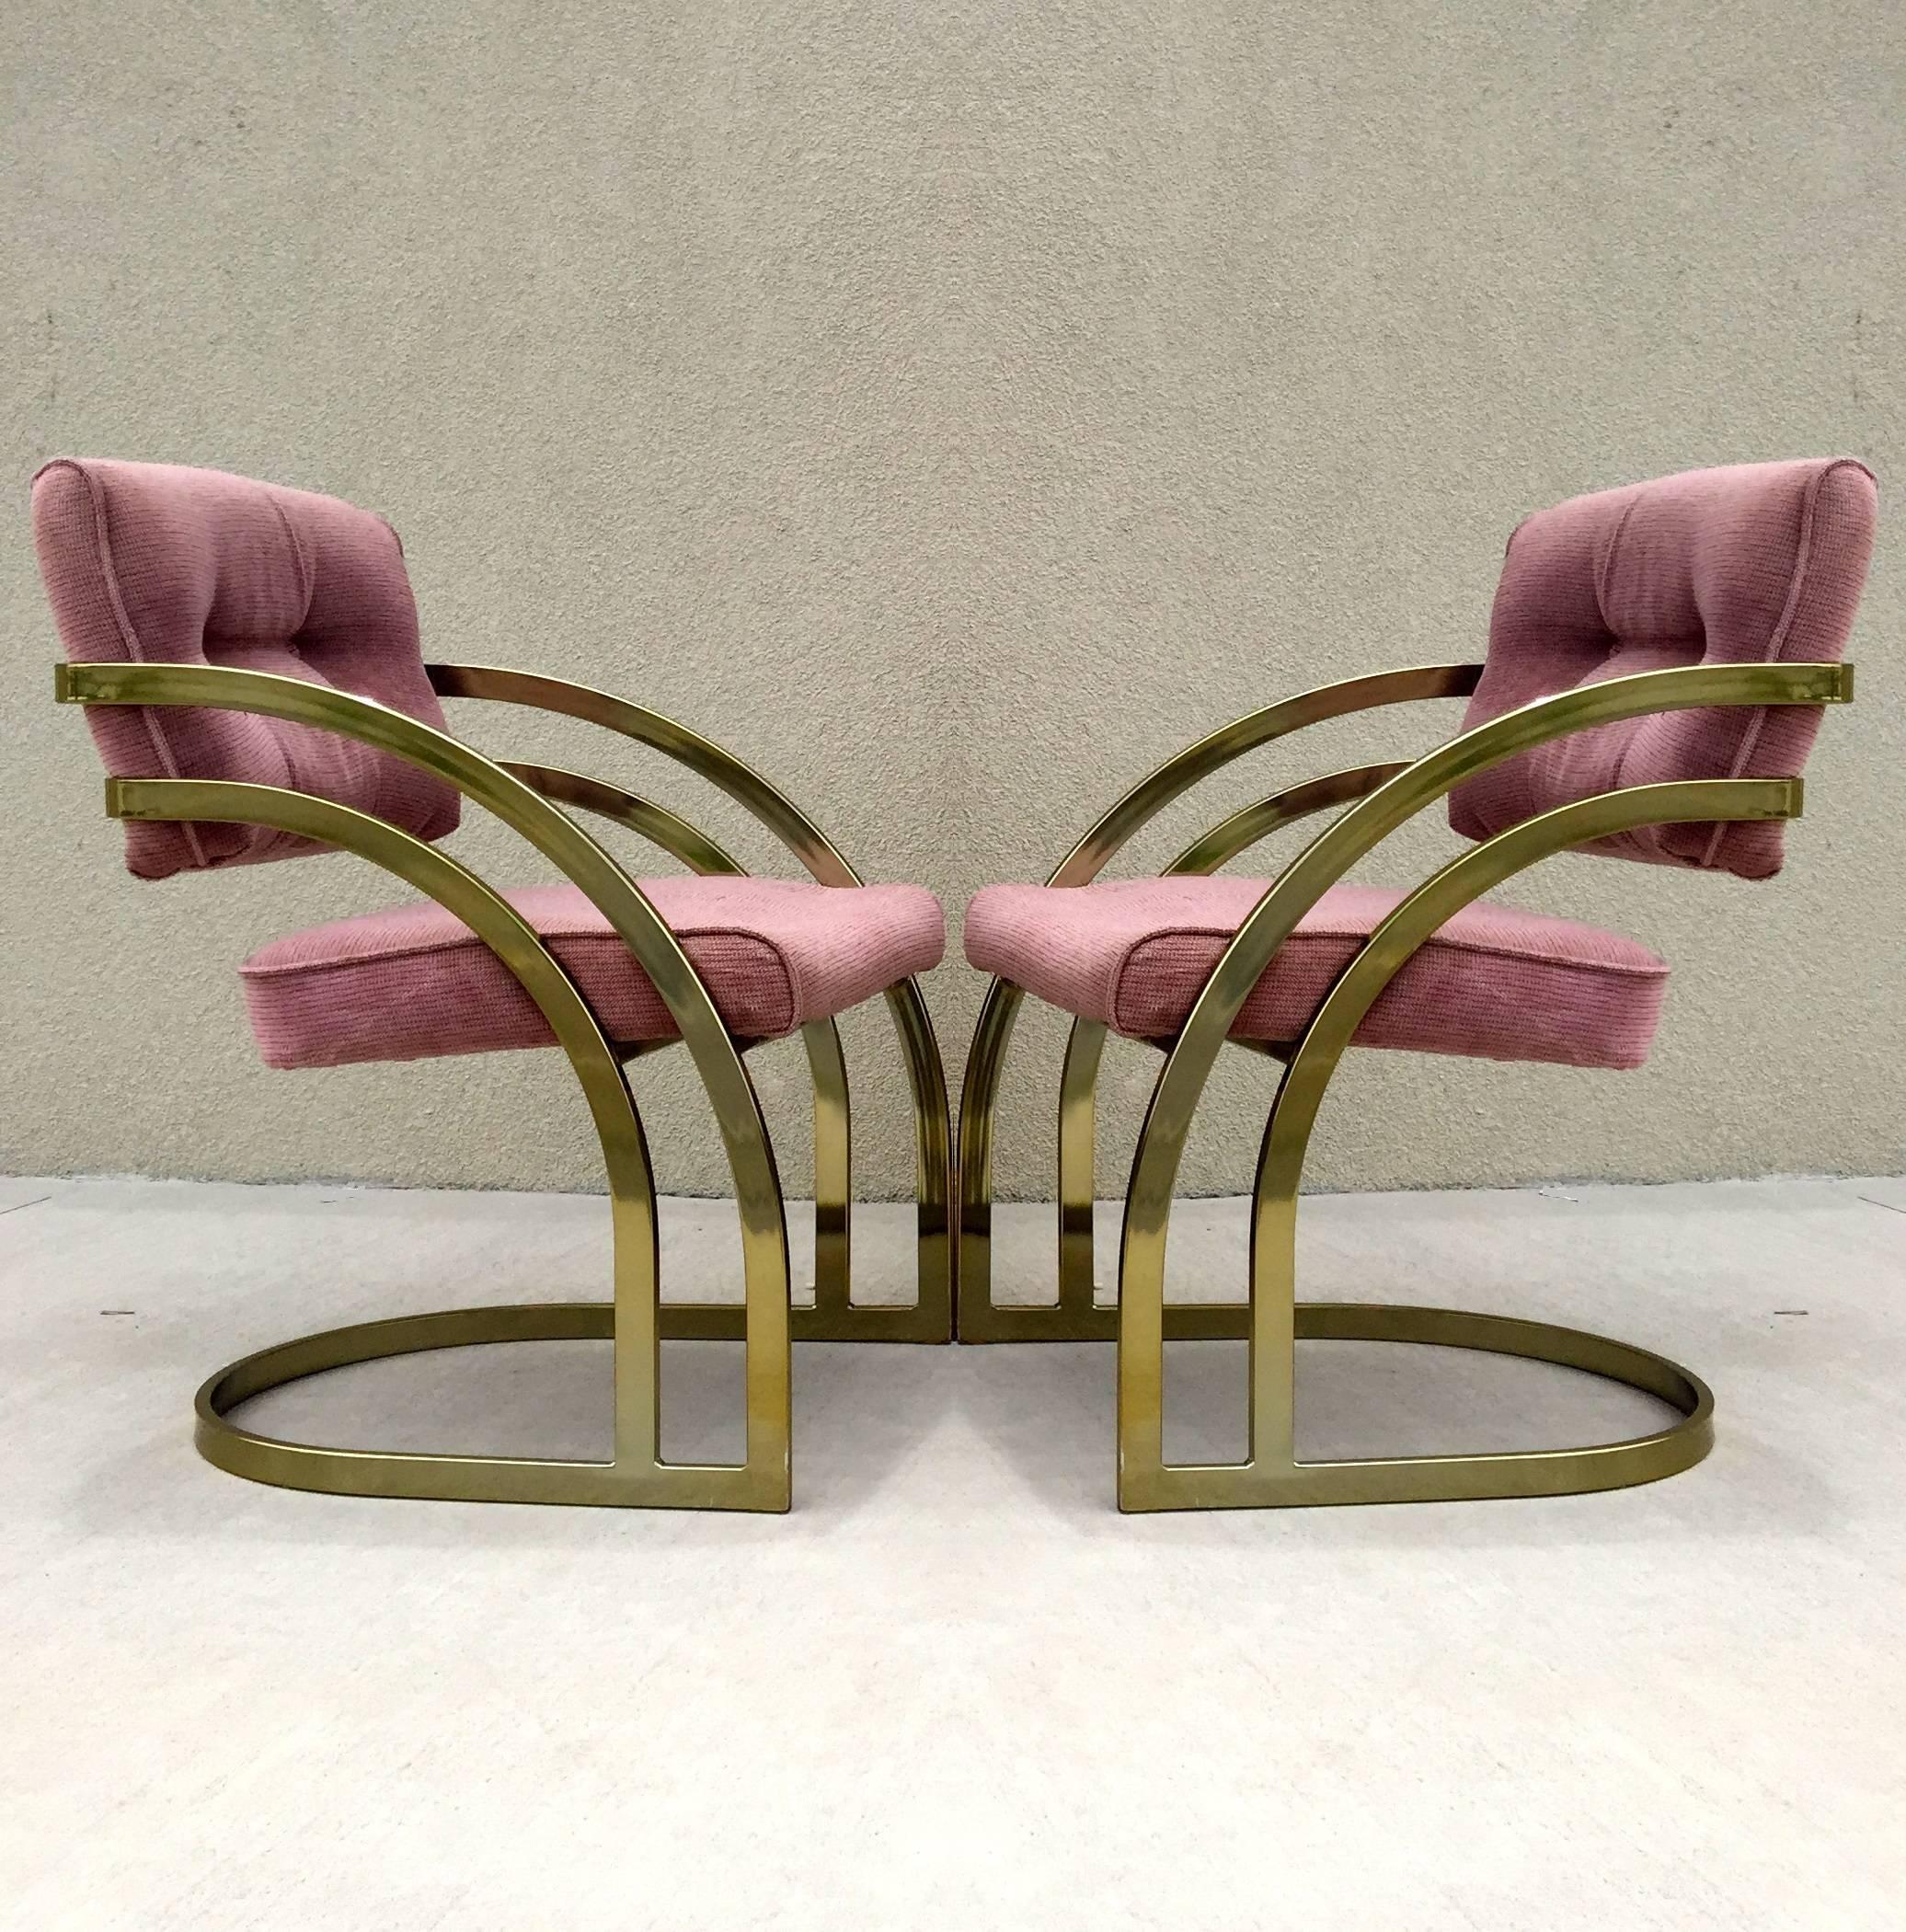 Stylish cantilever brass-plated frame with plush tufted upholstery dining chairs attributed to Milo Baughman. Amazing lines make up this sexy double banded brass set.

    